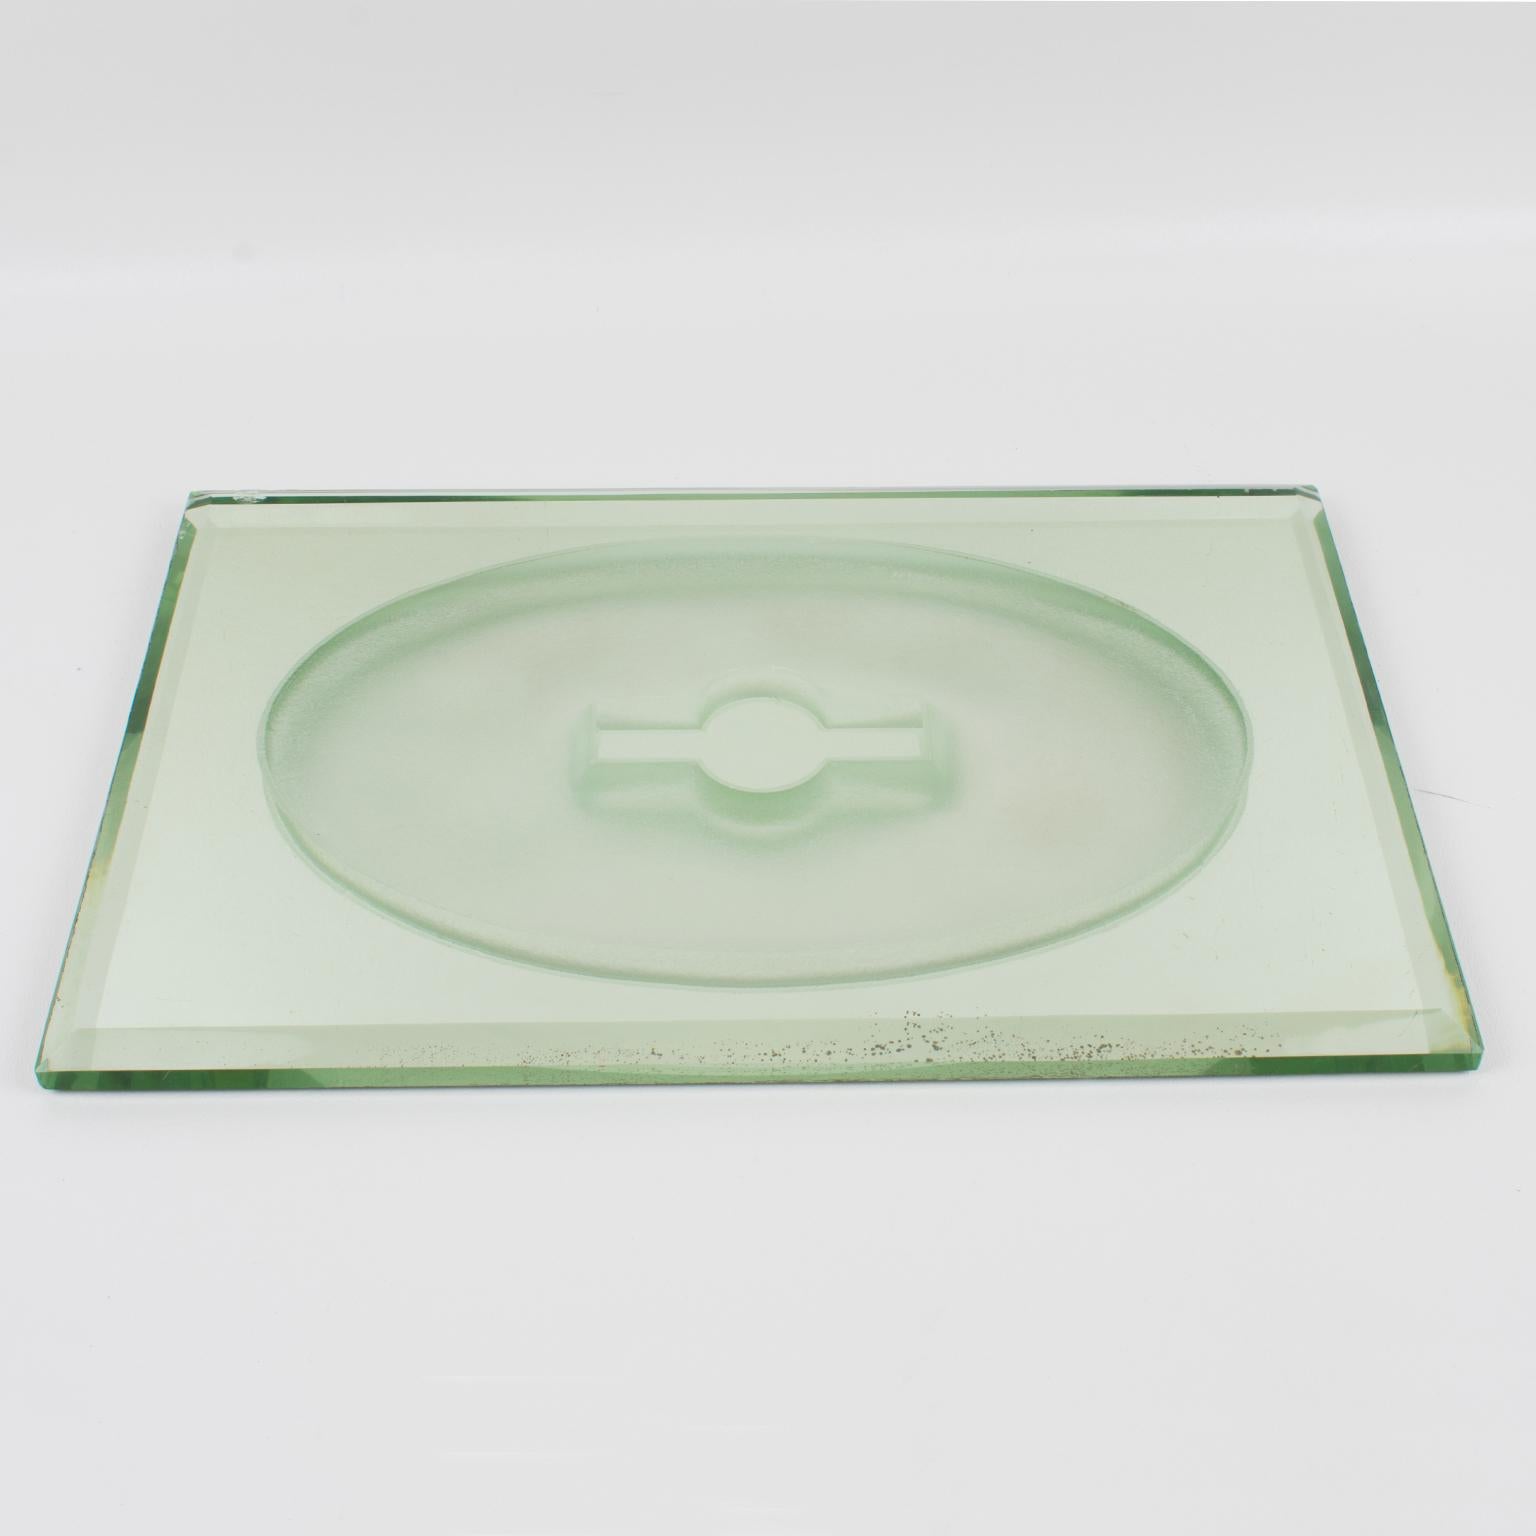 This Art Deco mirrored tray, centerpiece, or platter was designed by French designer Jean Luce (1895 - 1964) in the 1930s. The thick mirrored glass slab has a sanded oval geometric motif in the center and deep beveling around it. The centerpiece